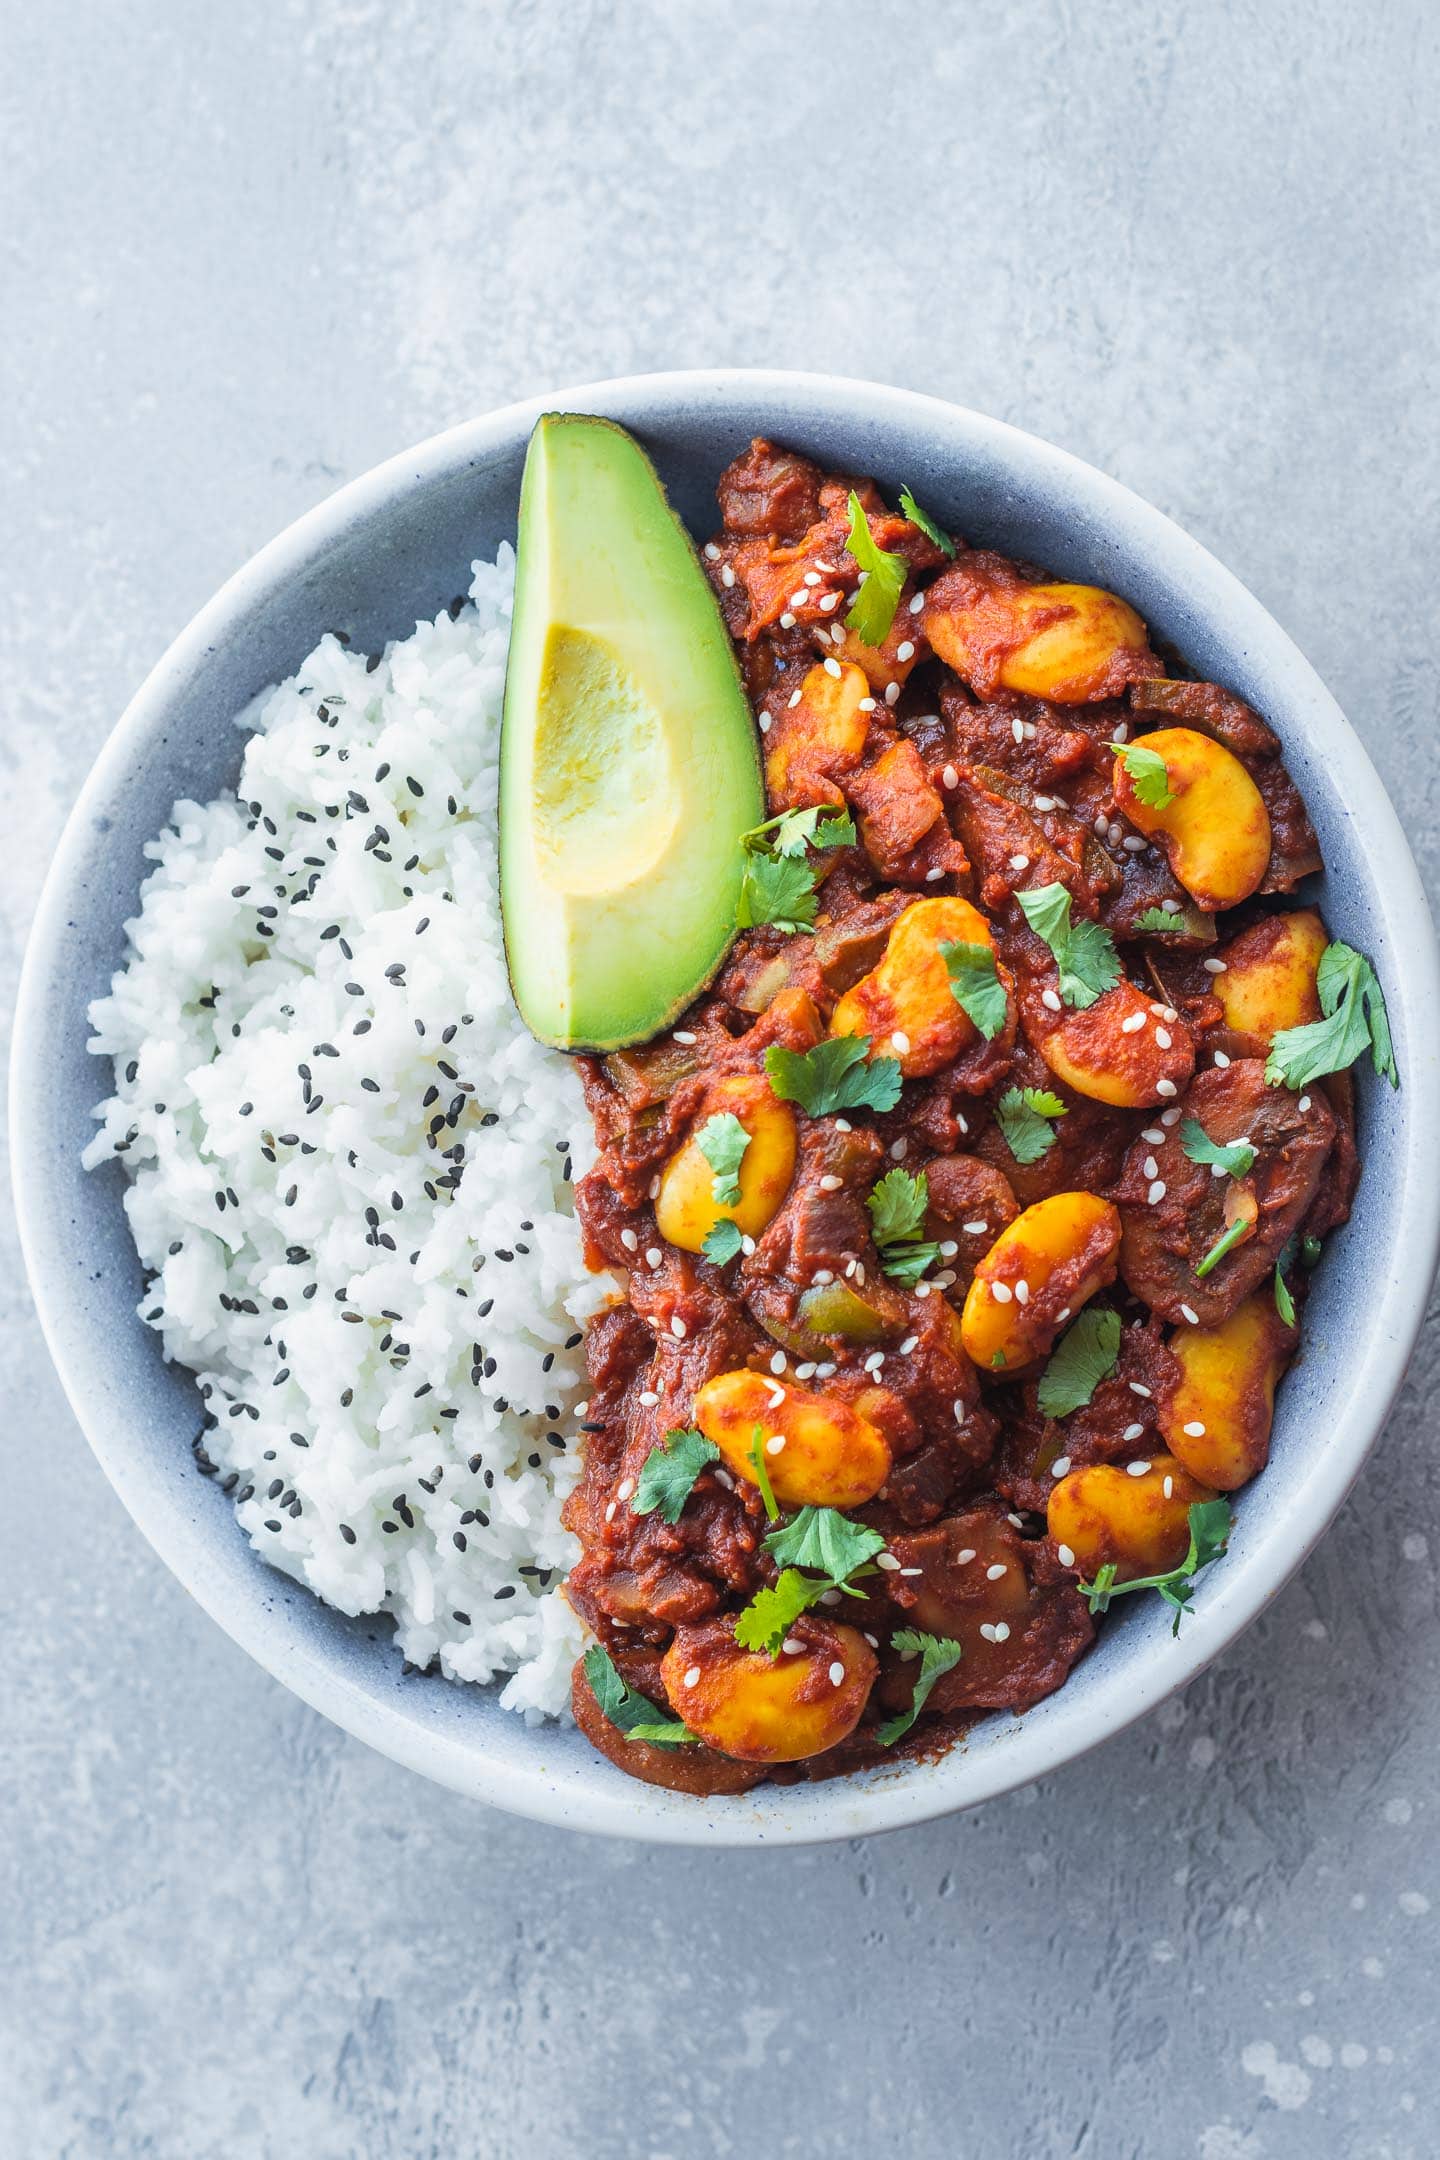 Vegan chili recipe with butter beans and avocado